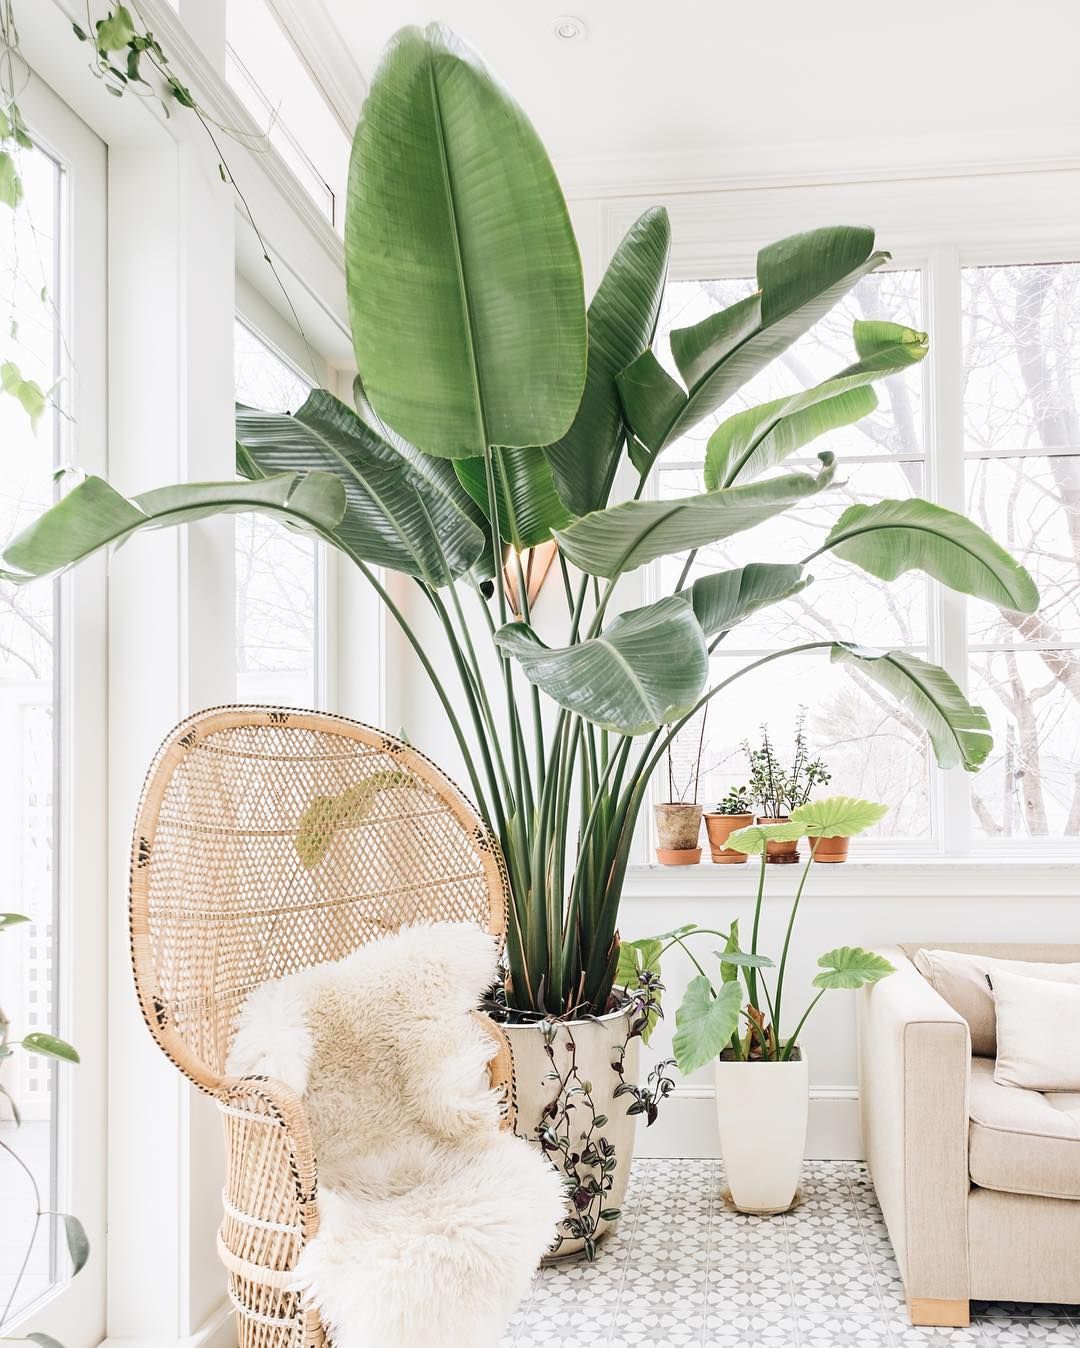 Bohemian Chair and Indoor Plant via @emersonthoreau